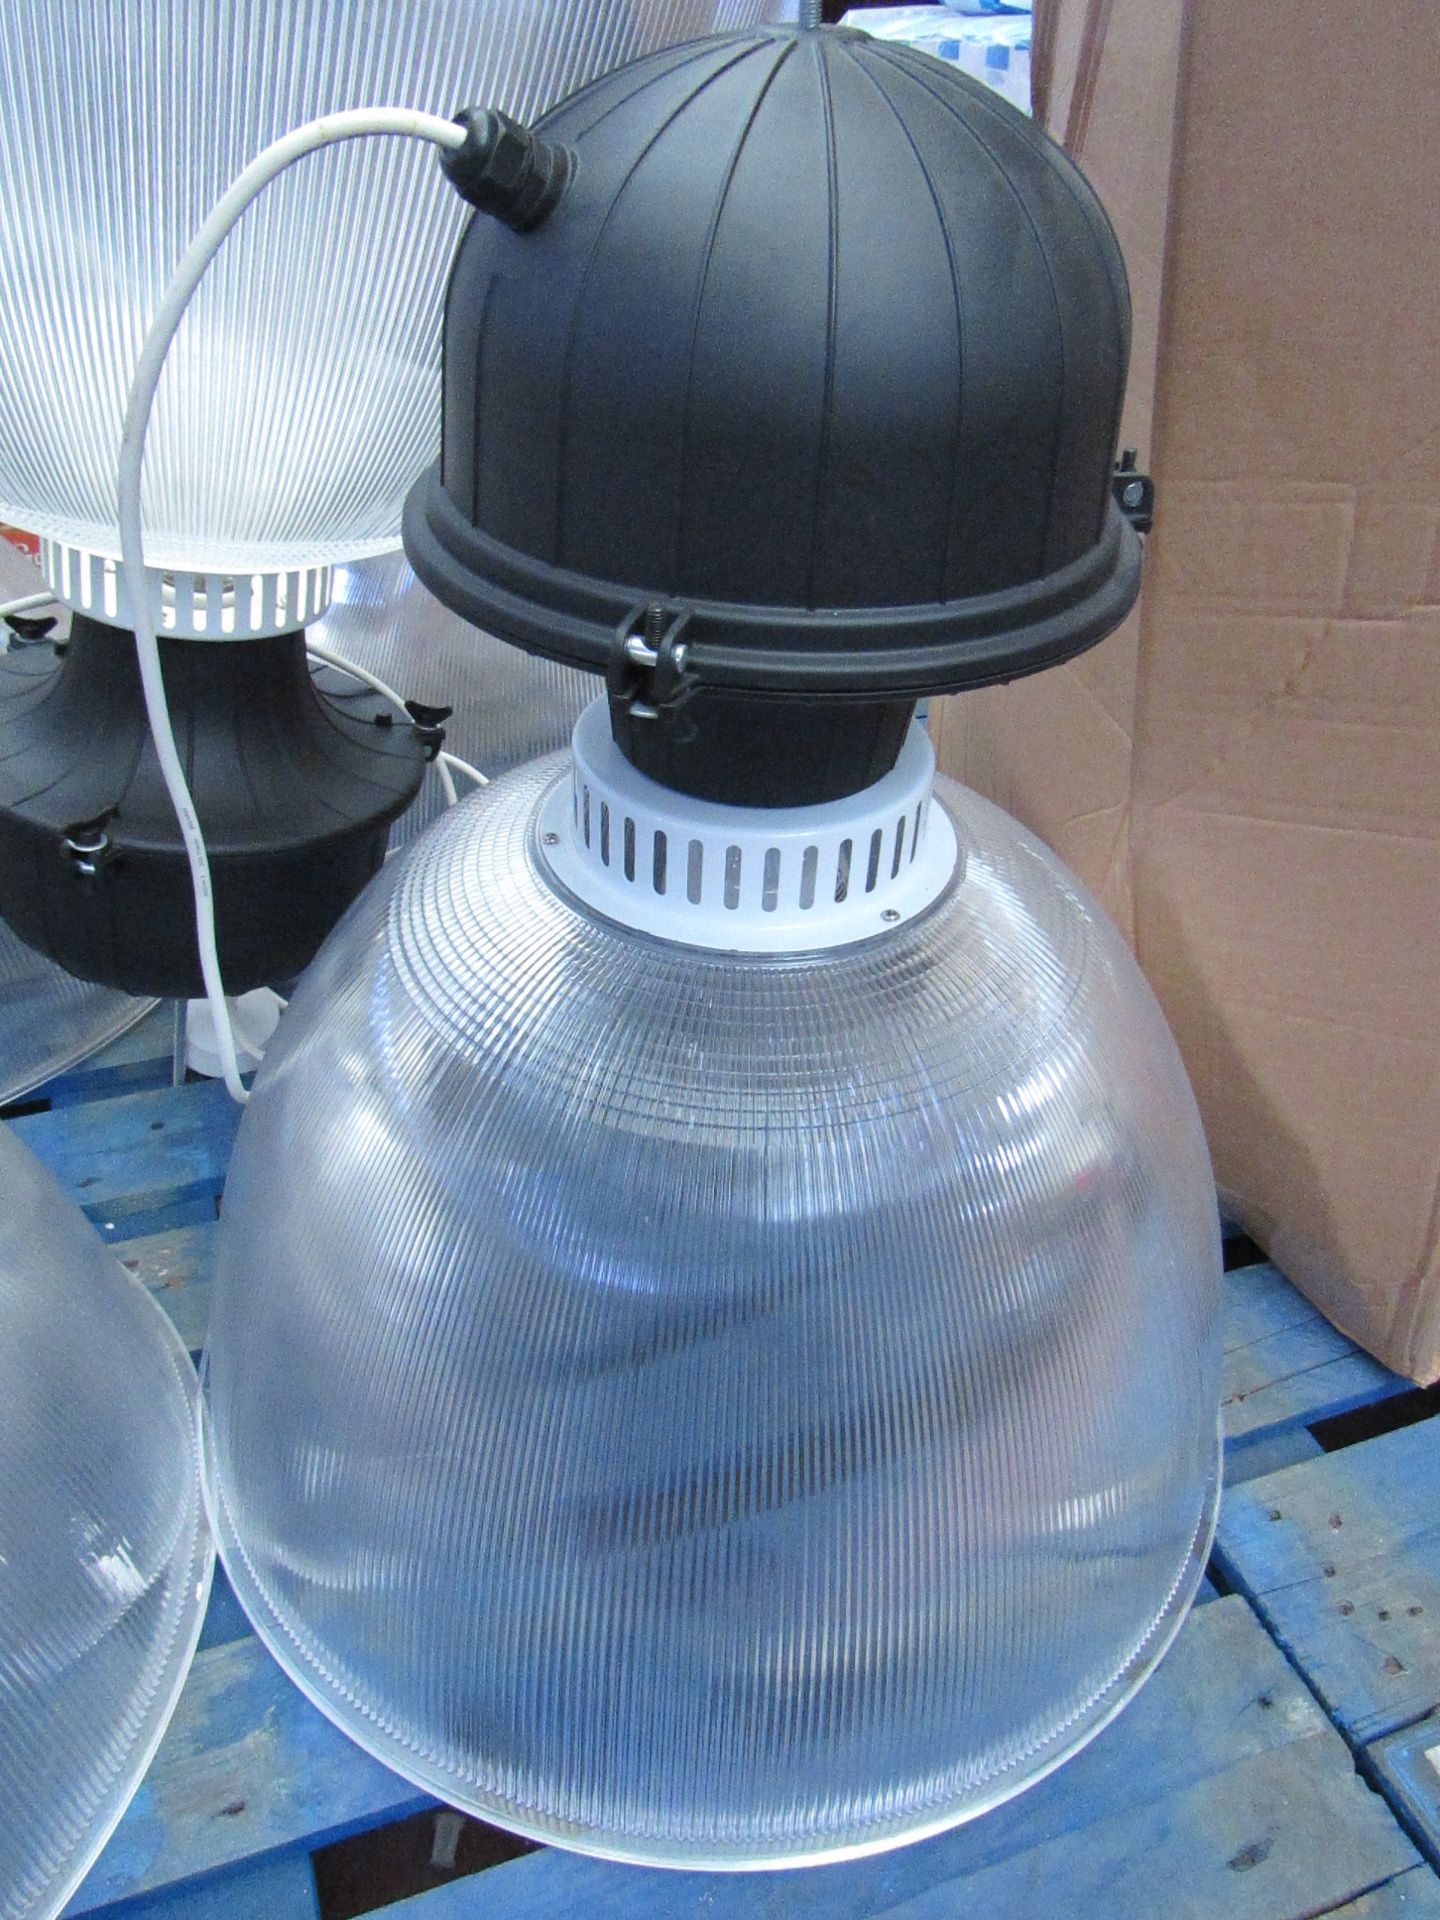 Hilclare Paloma large (57cm) heavy duty factory/ warehouse light (with cover, bulb and driver),